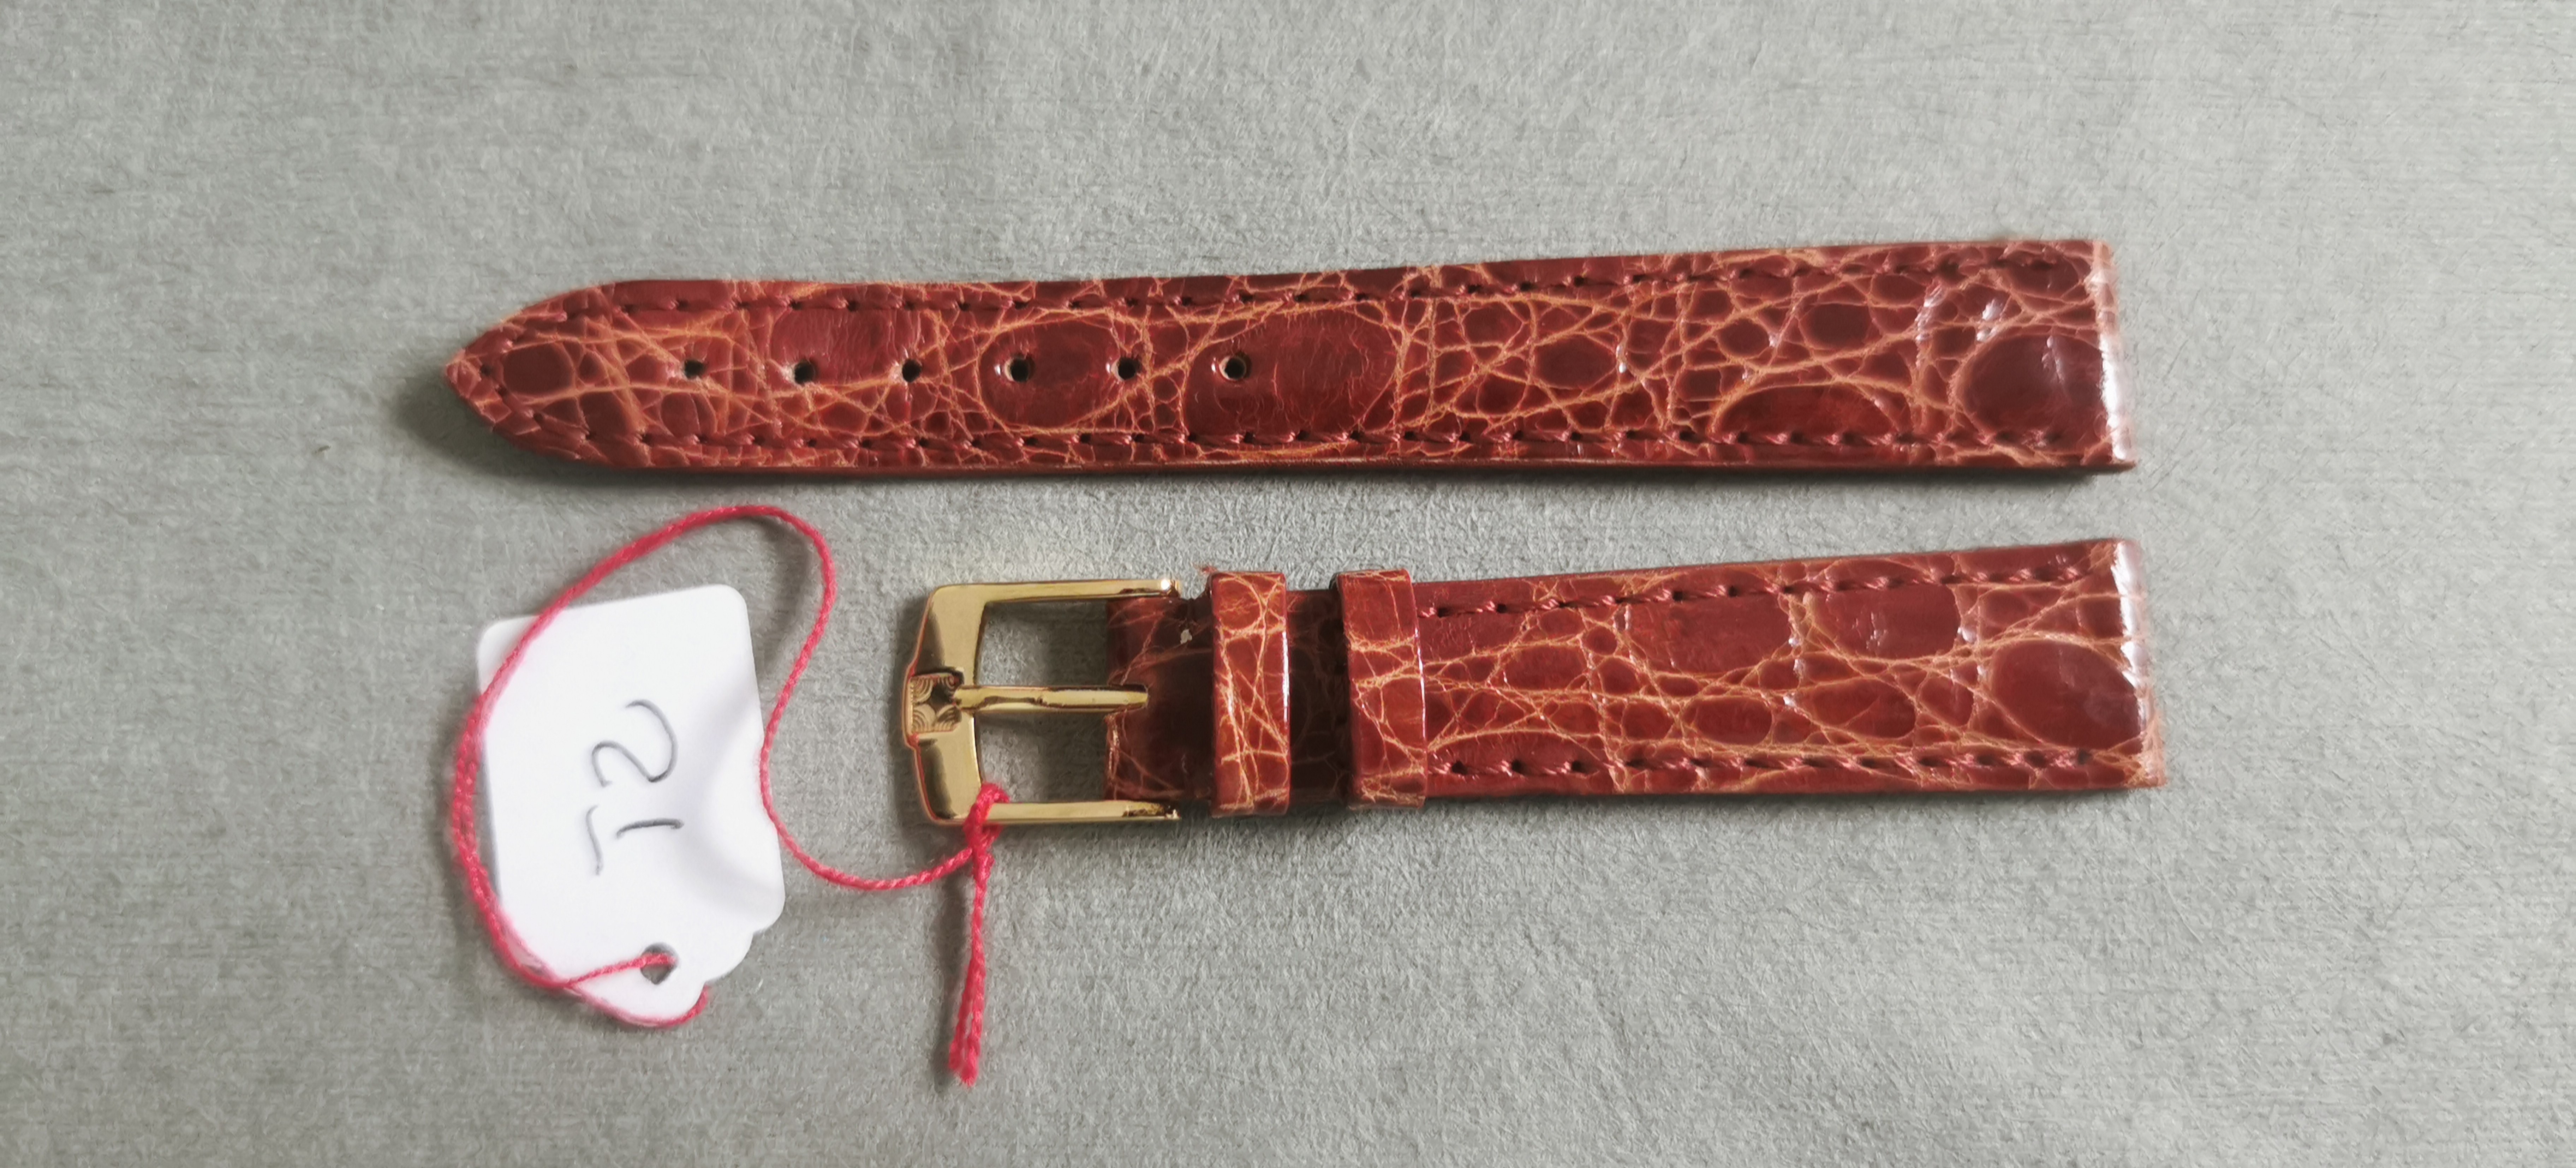 Zenith leather strap T2 croco brown mm 15-12 with buckle mm 12 gold plated nos | San Giorgio a Cremano